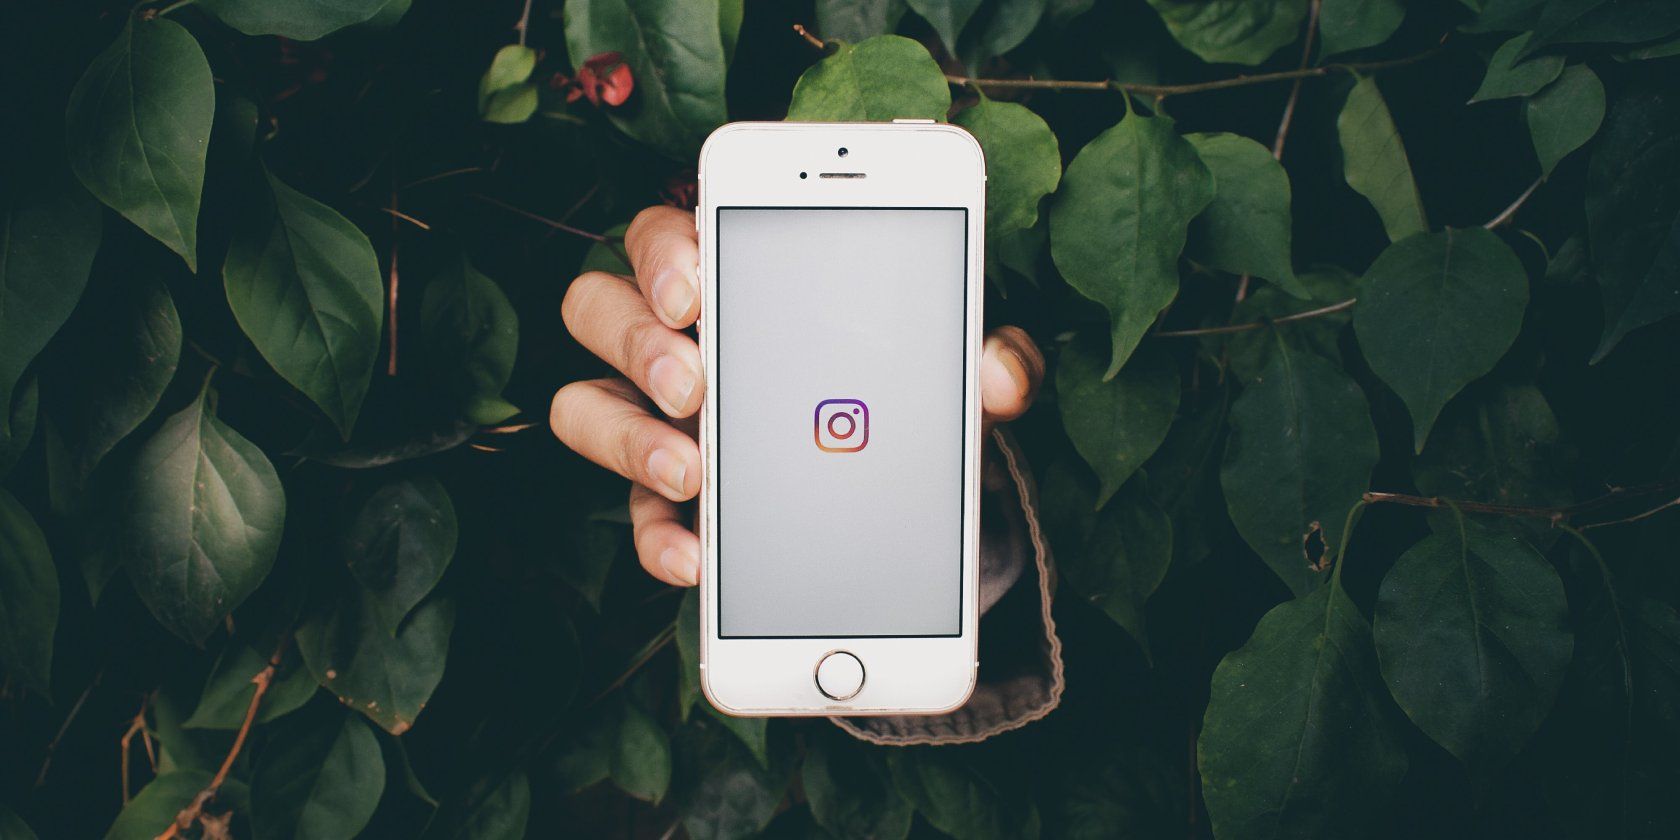 Person's arm popping out of a bush while holding a phone with the Instagram logo on it